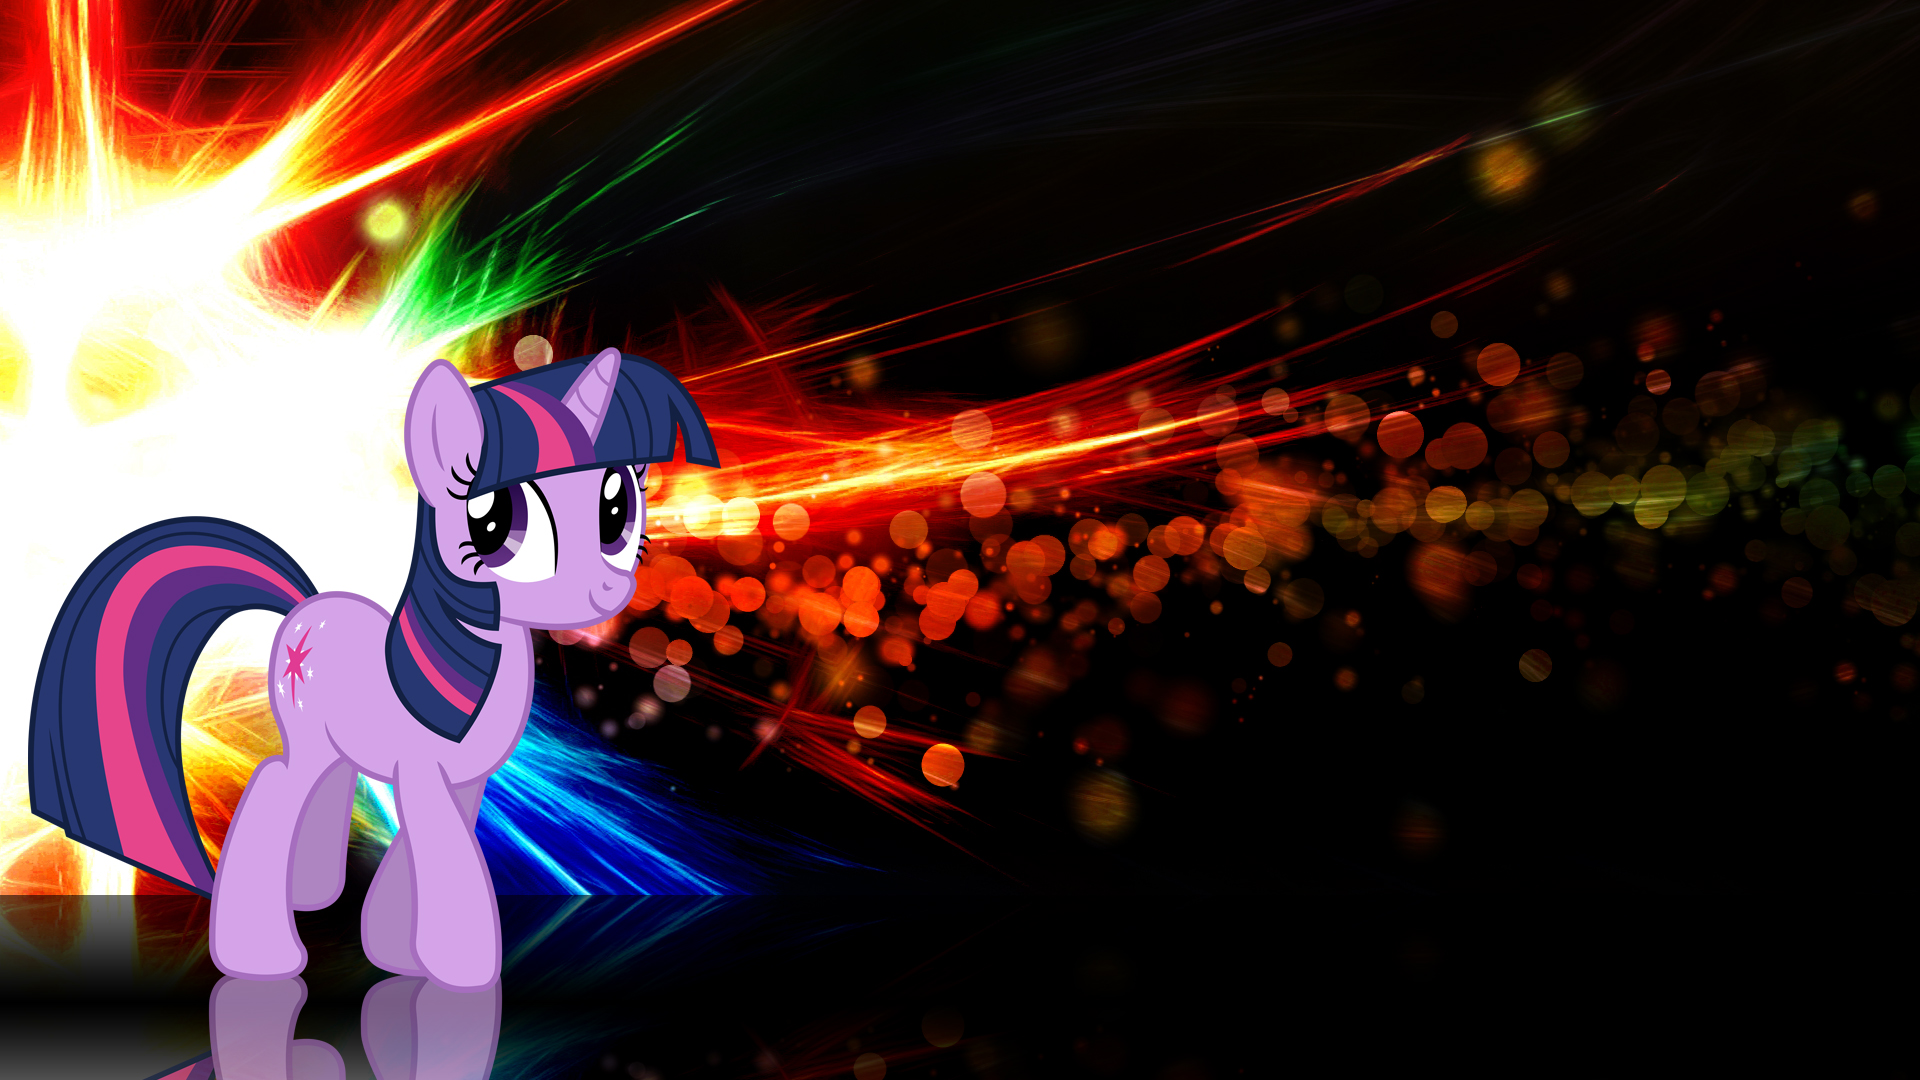 Twilight Sparkle Wallpaper #2 by Kigaroth